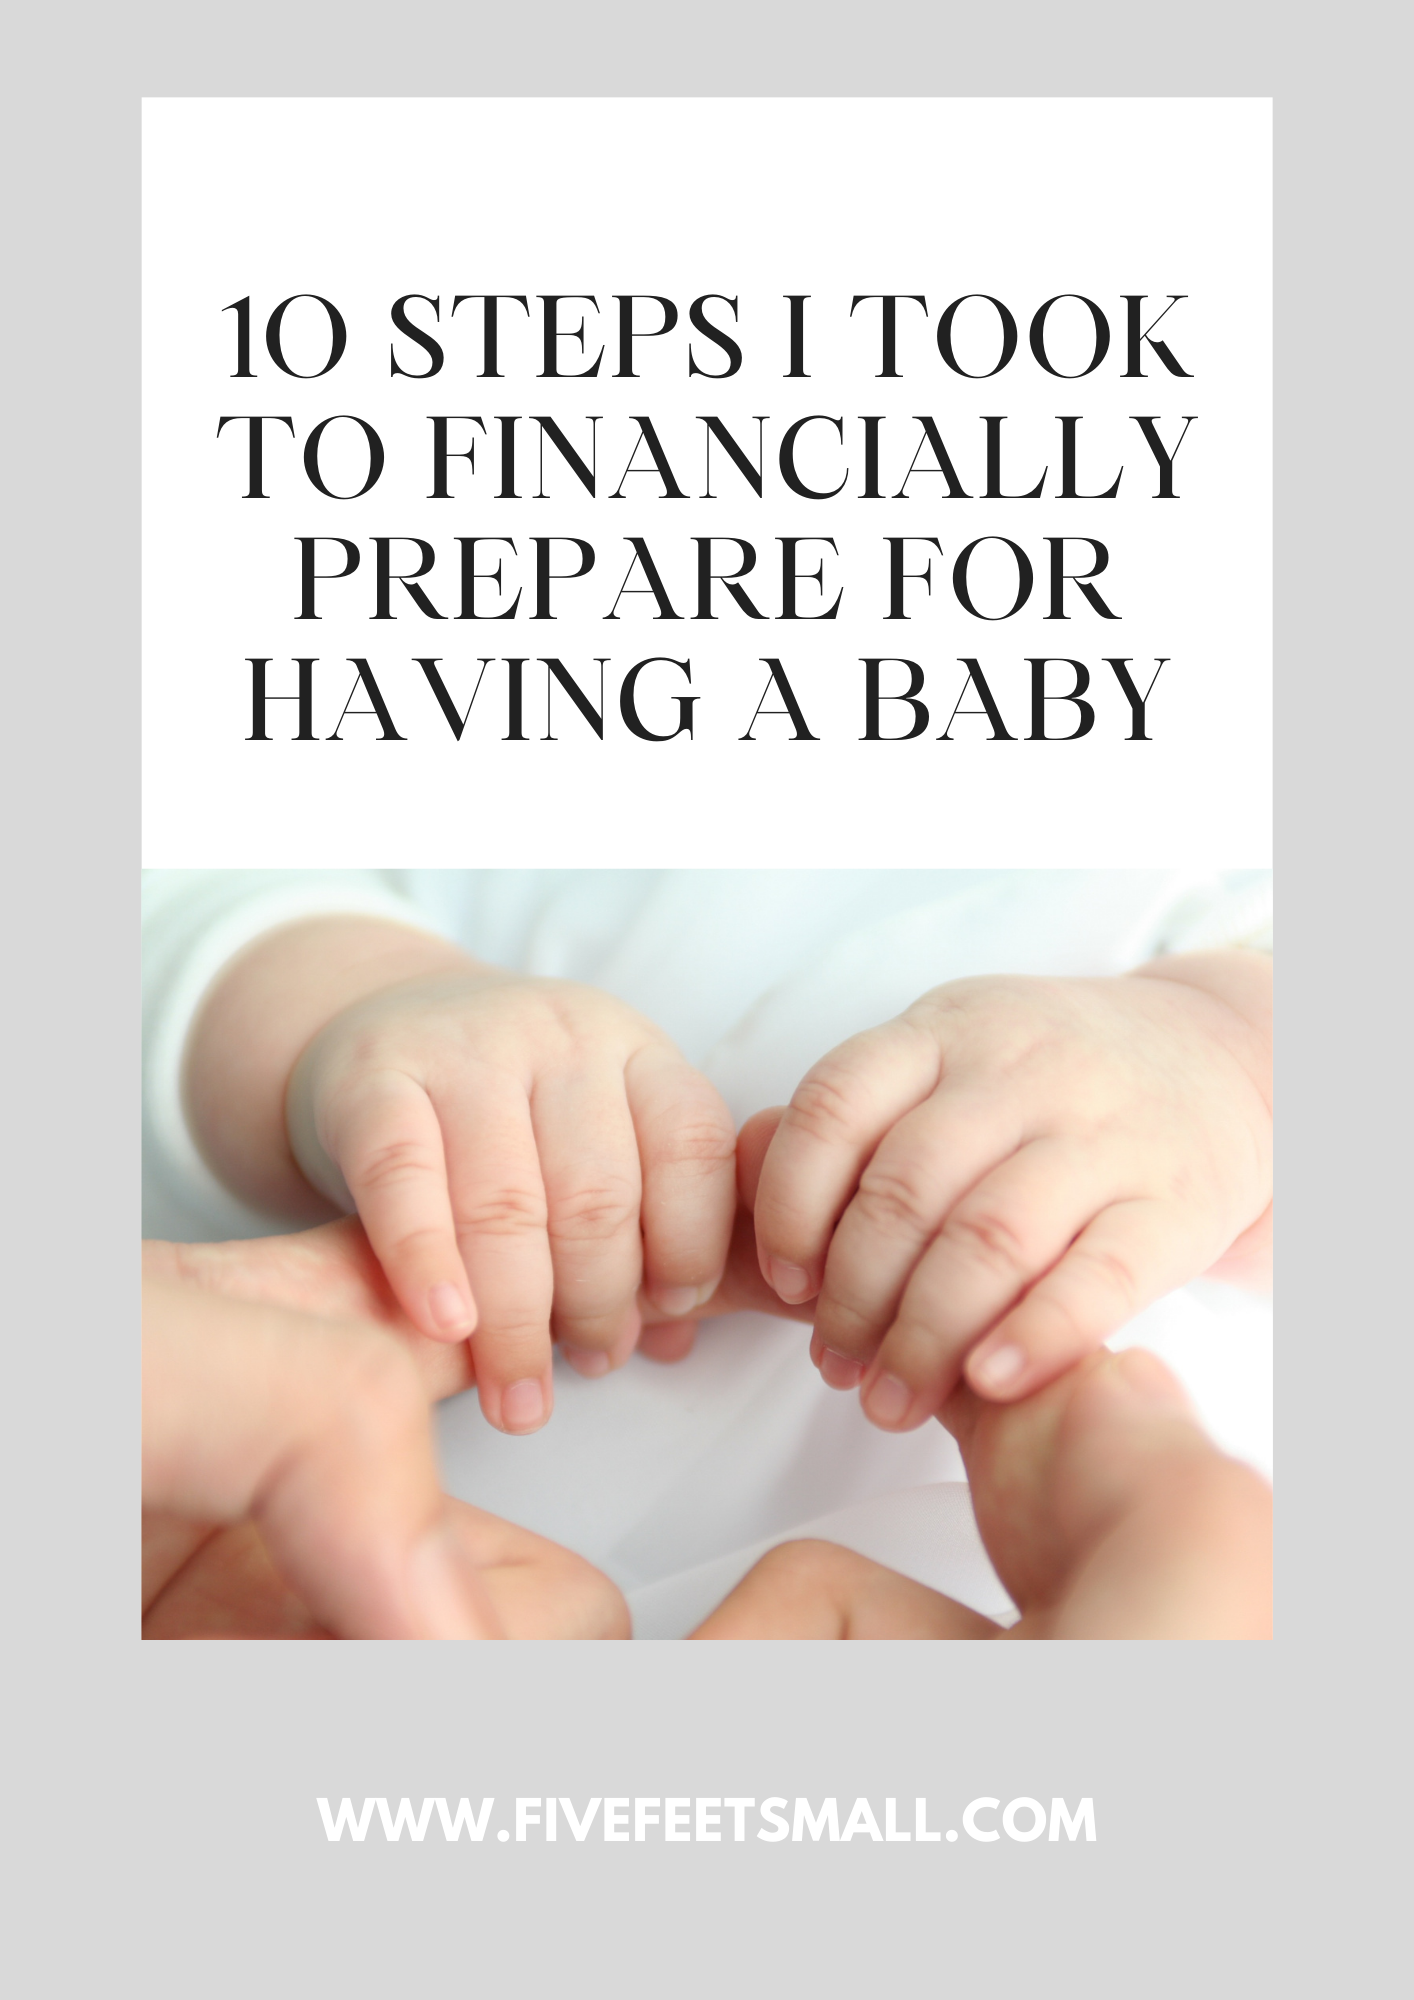 10 Steps I Took To Financially Prepare for Having a Baby